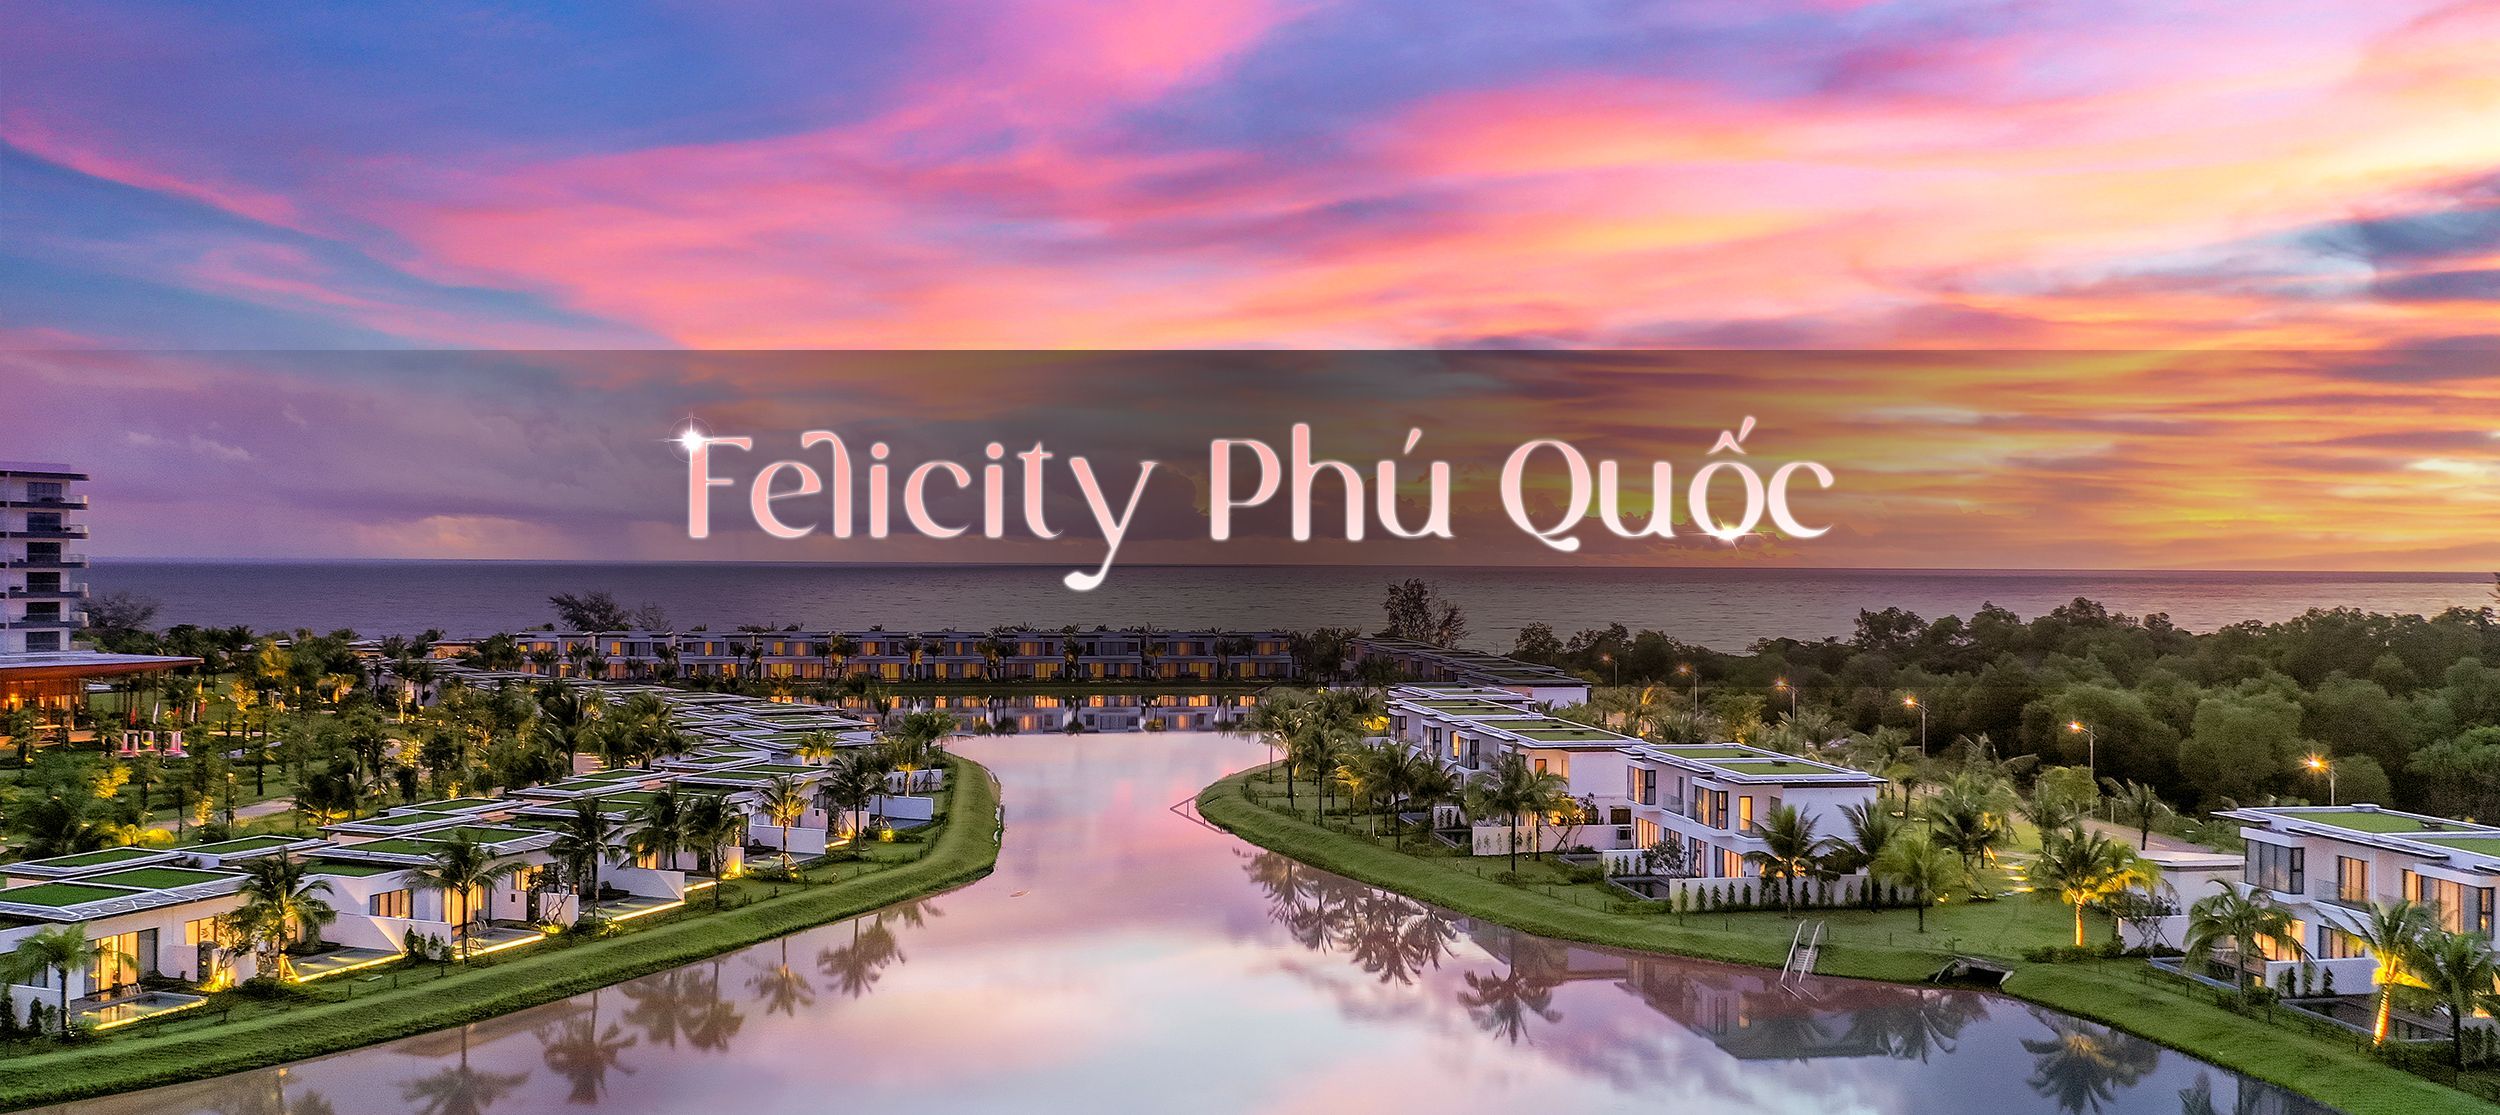 fecility-phu-quoc-nghi-duong.jpg